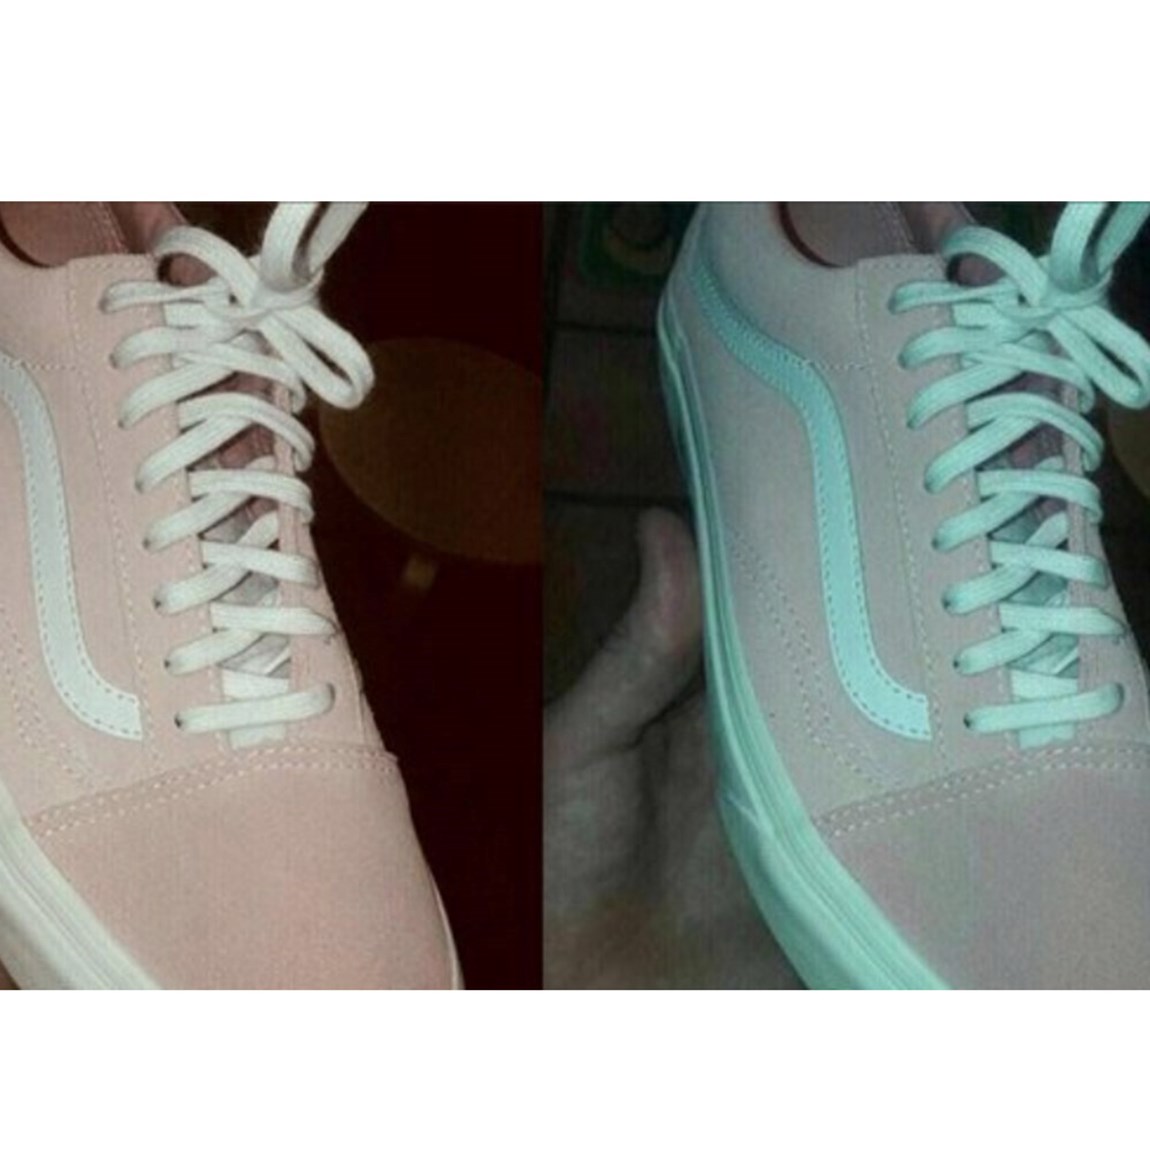 New internet craze! Do you think these trainers are pink and white or ...